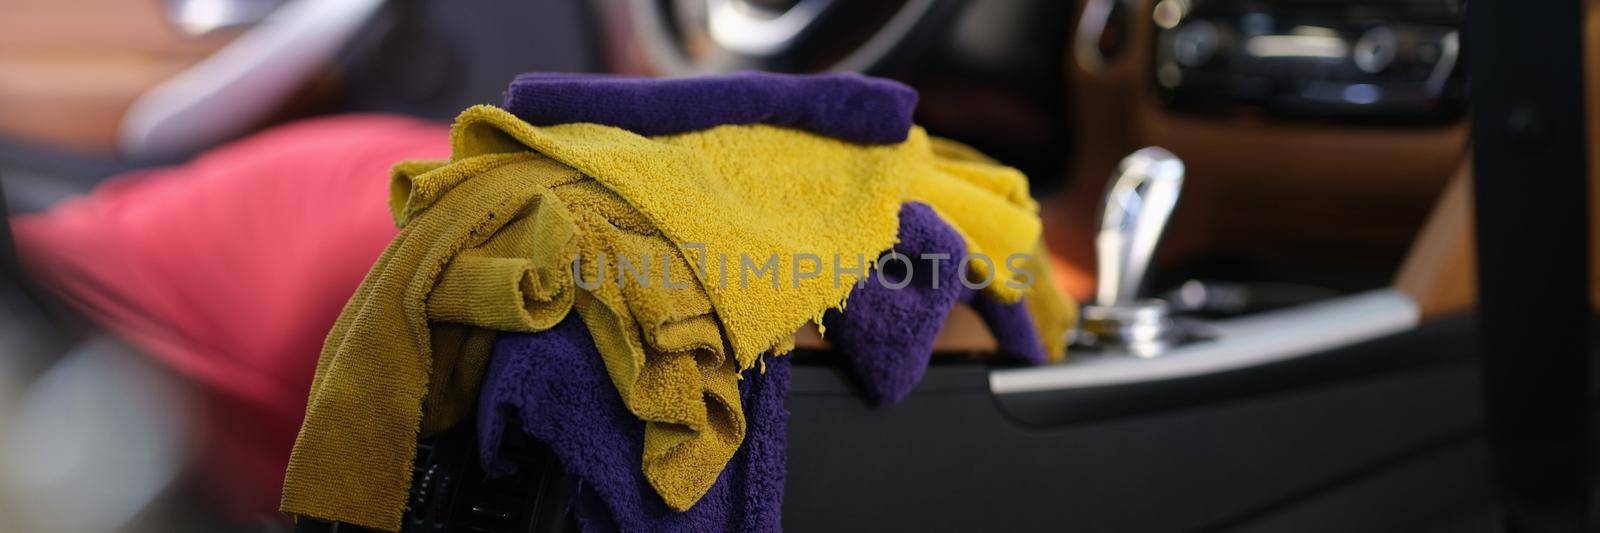 Multicolored microfiber rags lying in car interior closeup by kuprevich